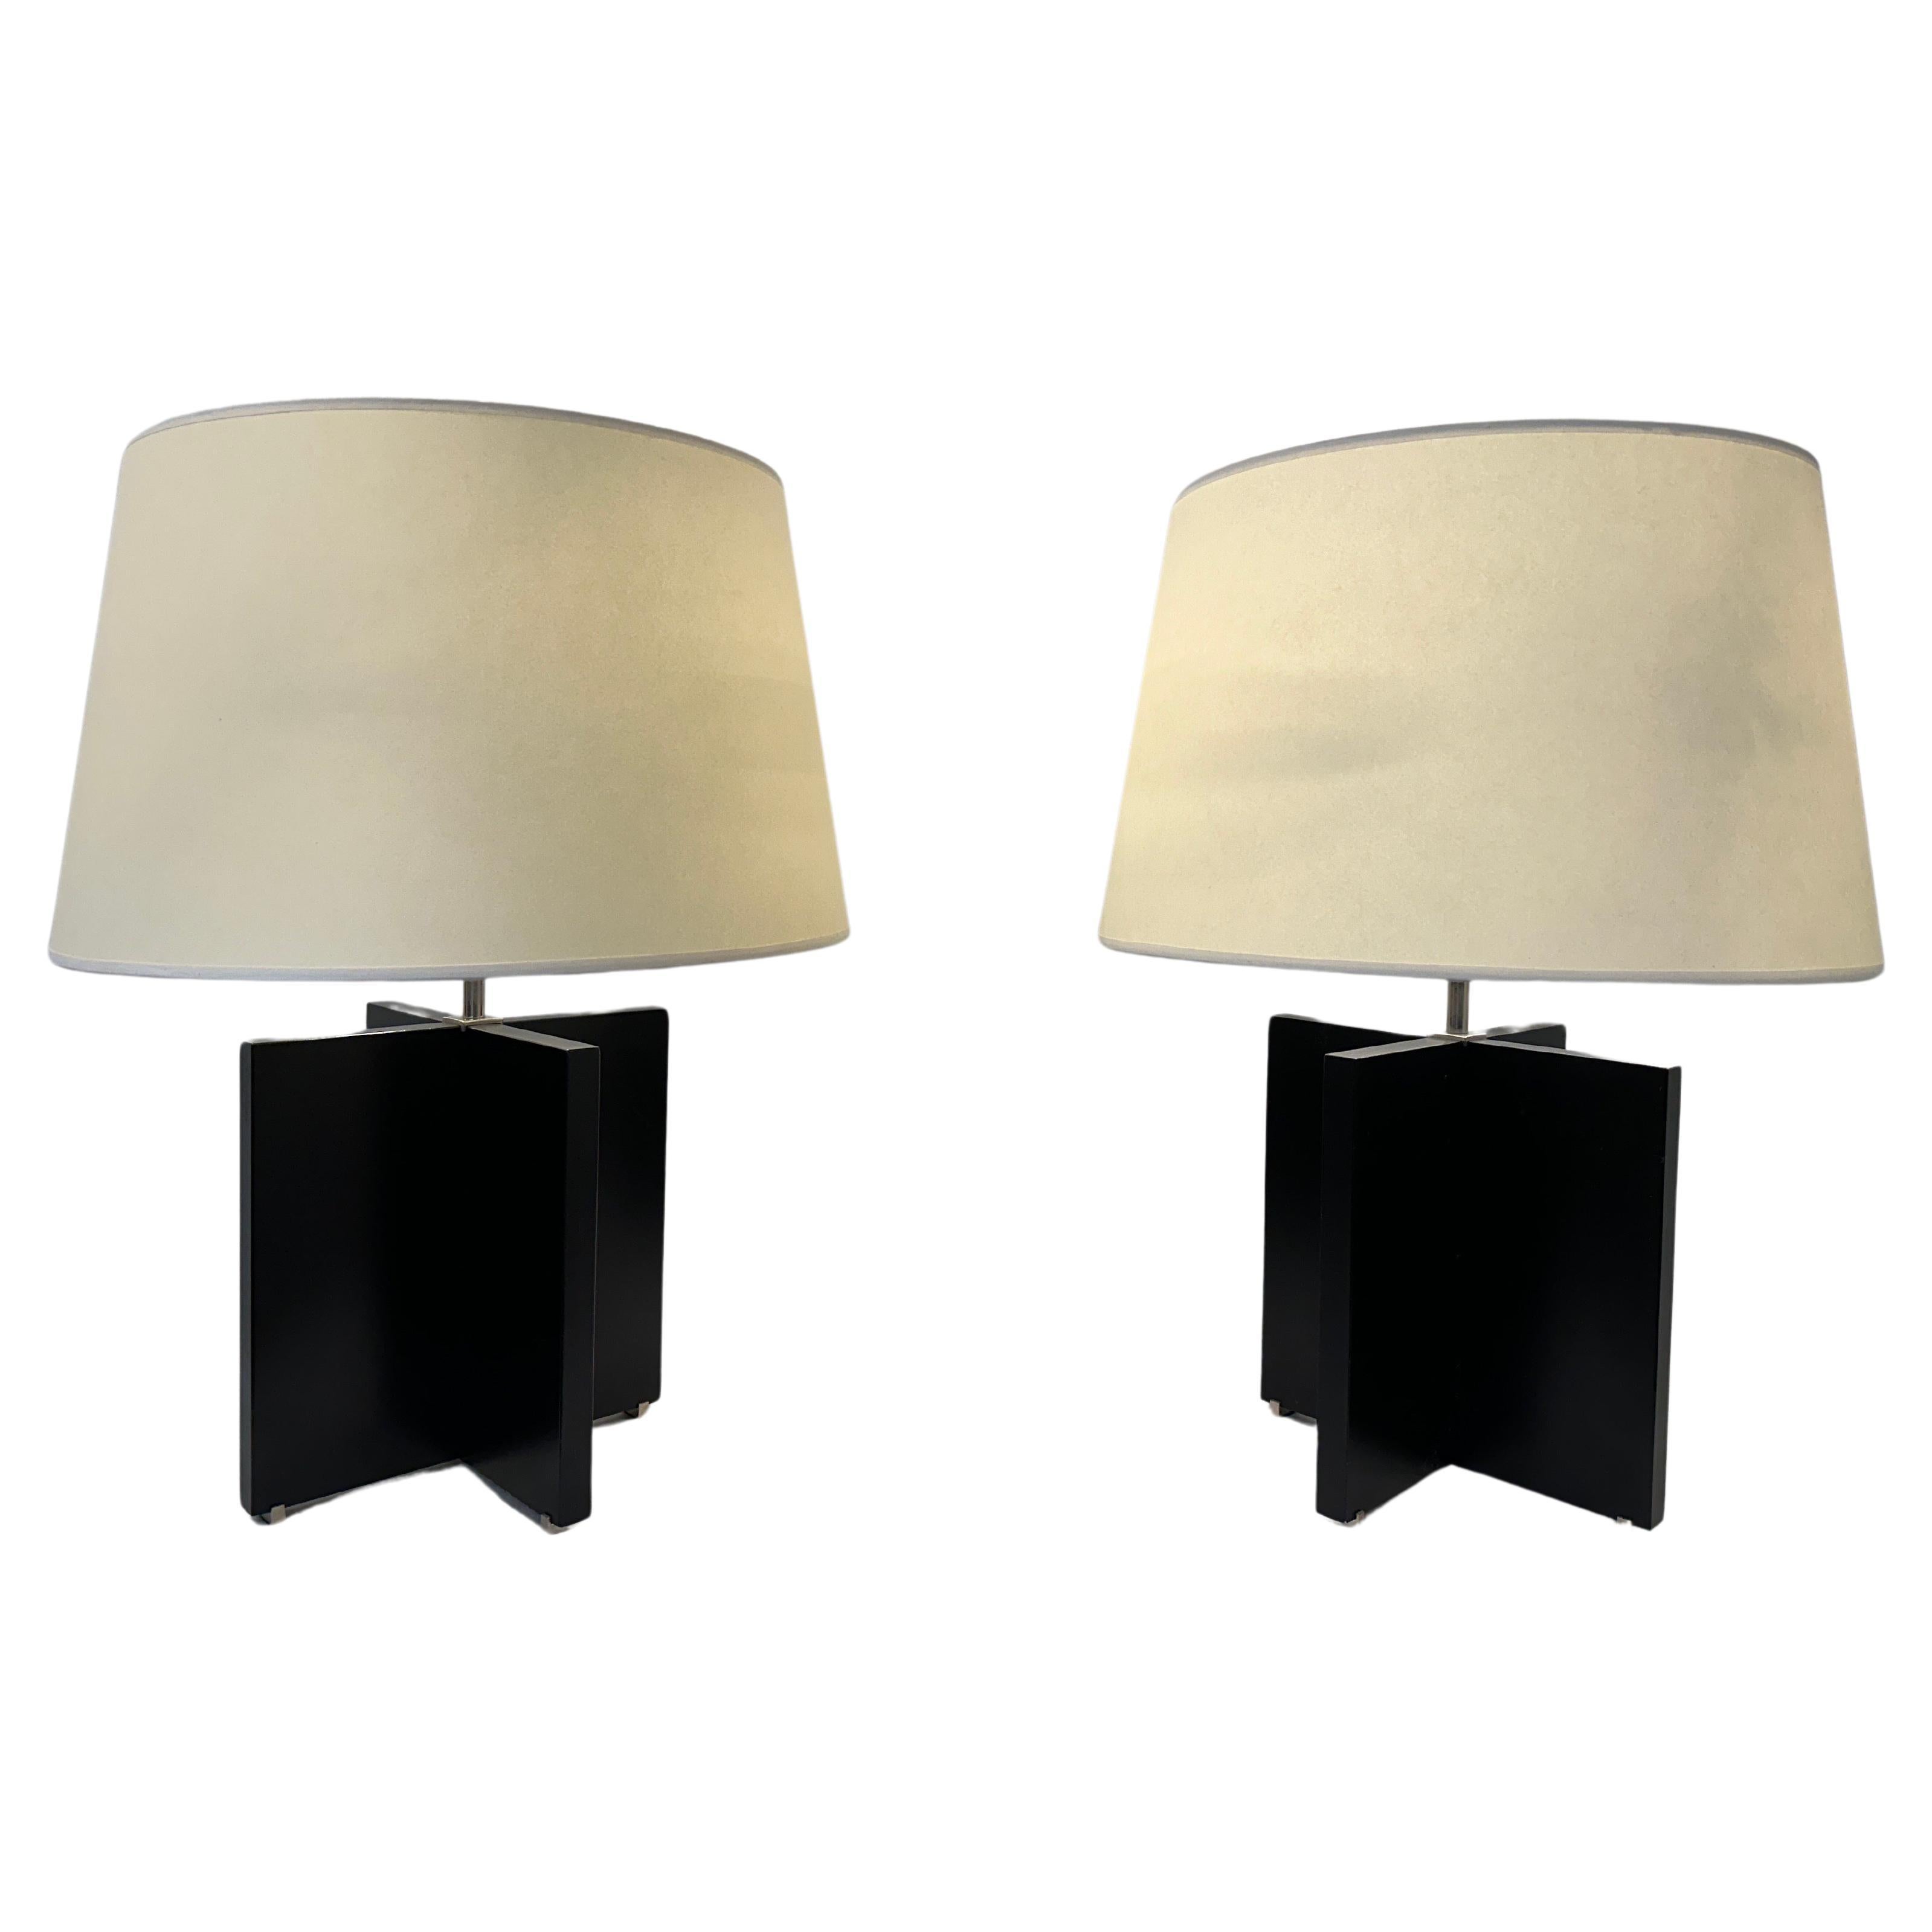 Rare Pair of Nessen "X" Shaped Table Lamps For Sale